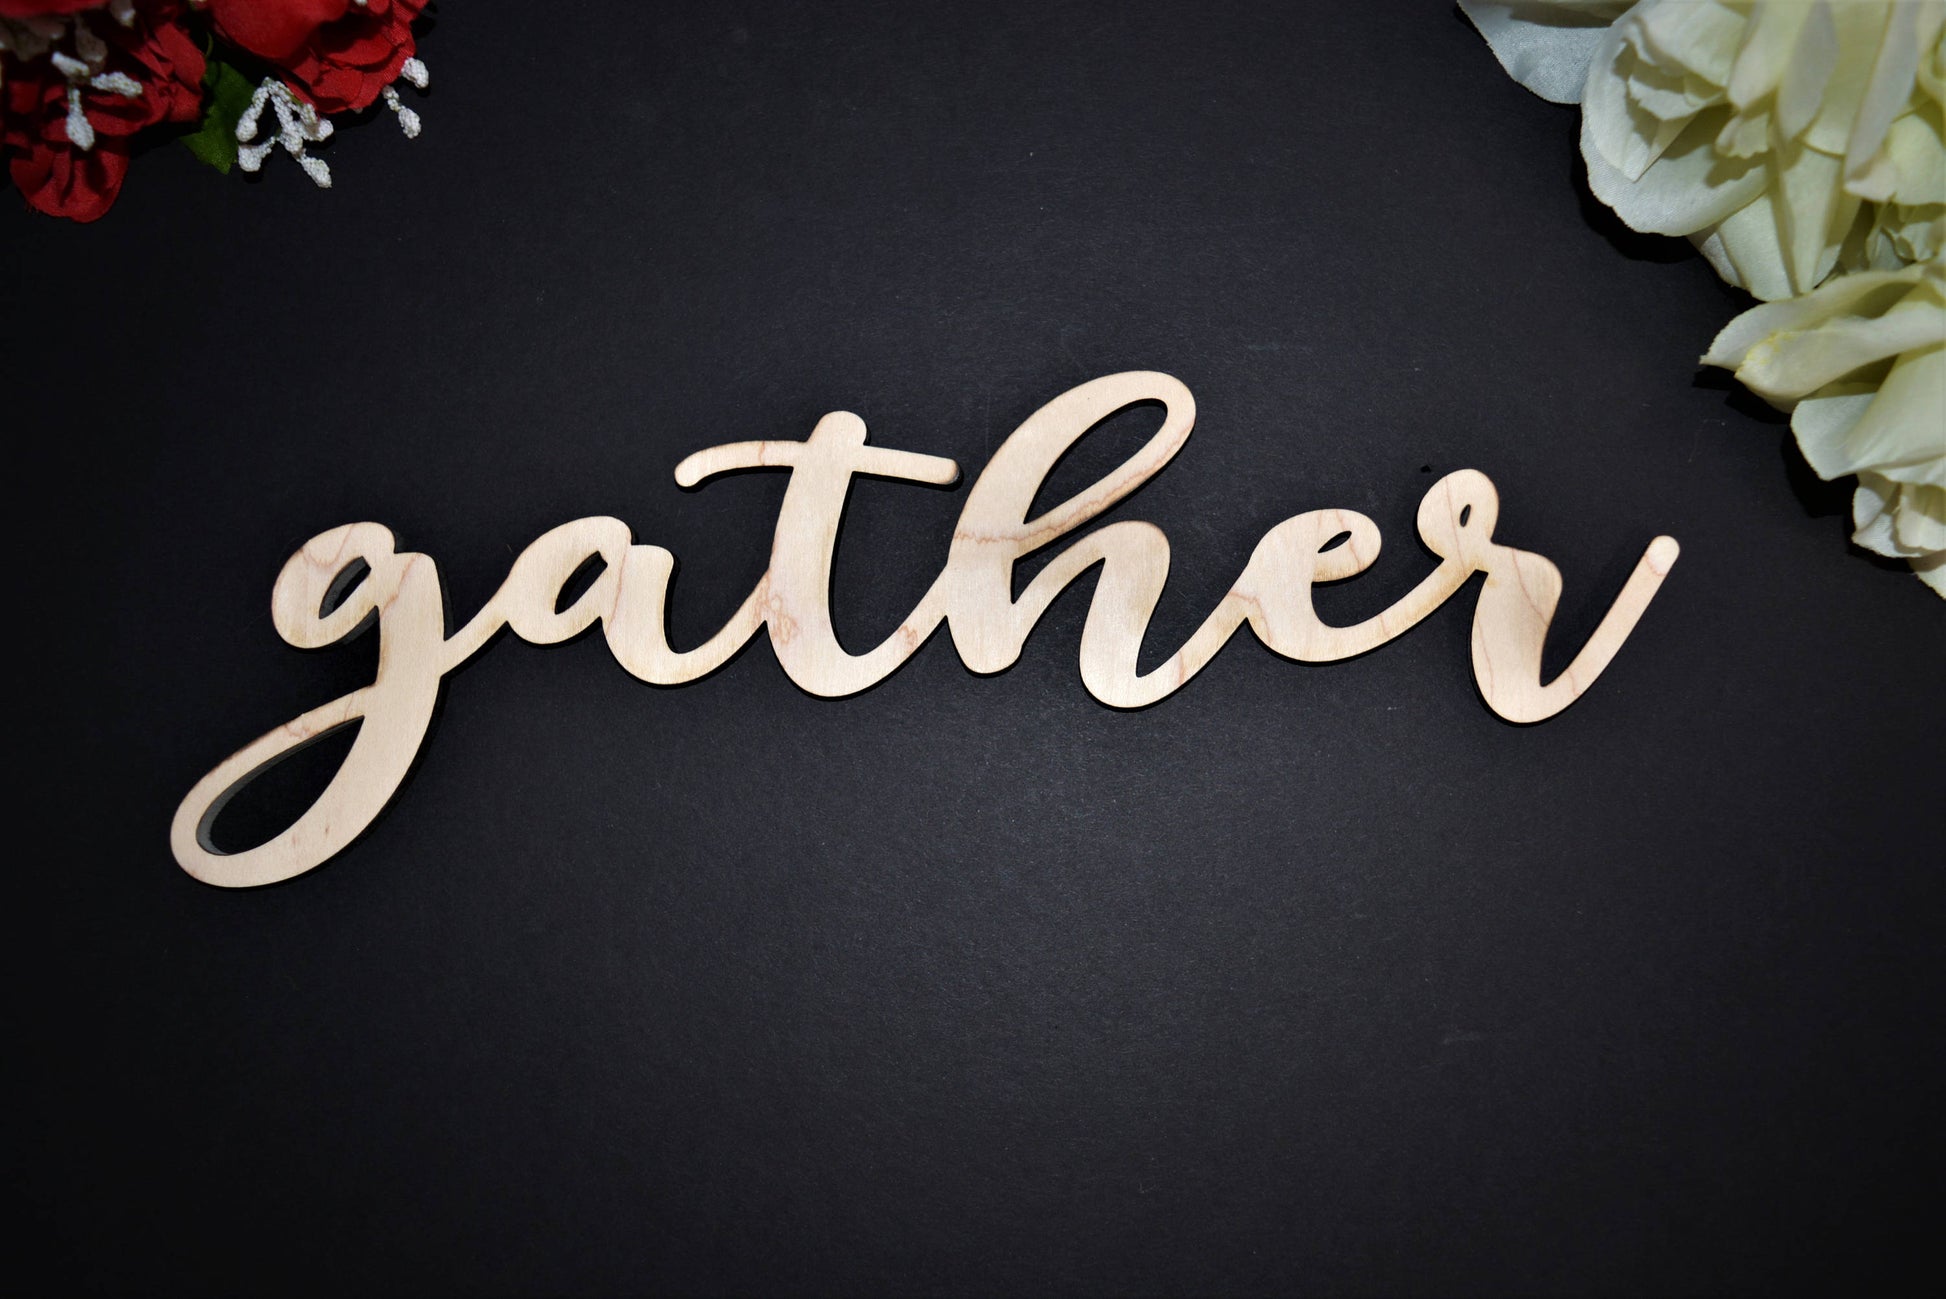 Gather wood sign